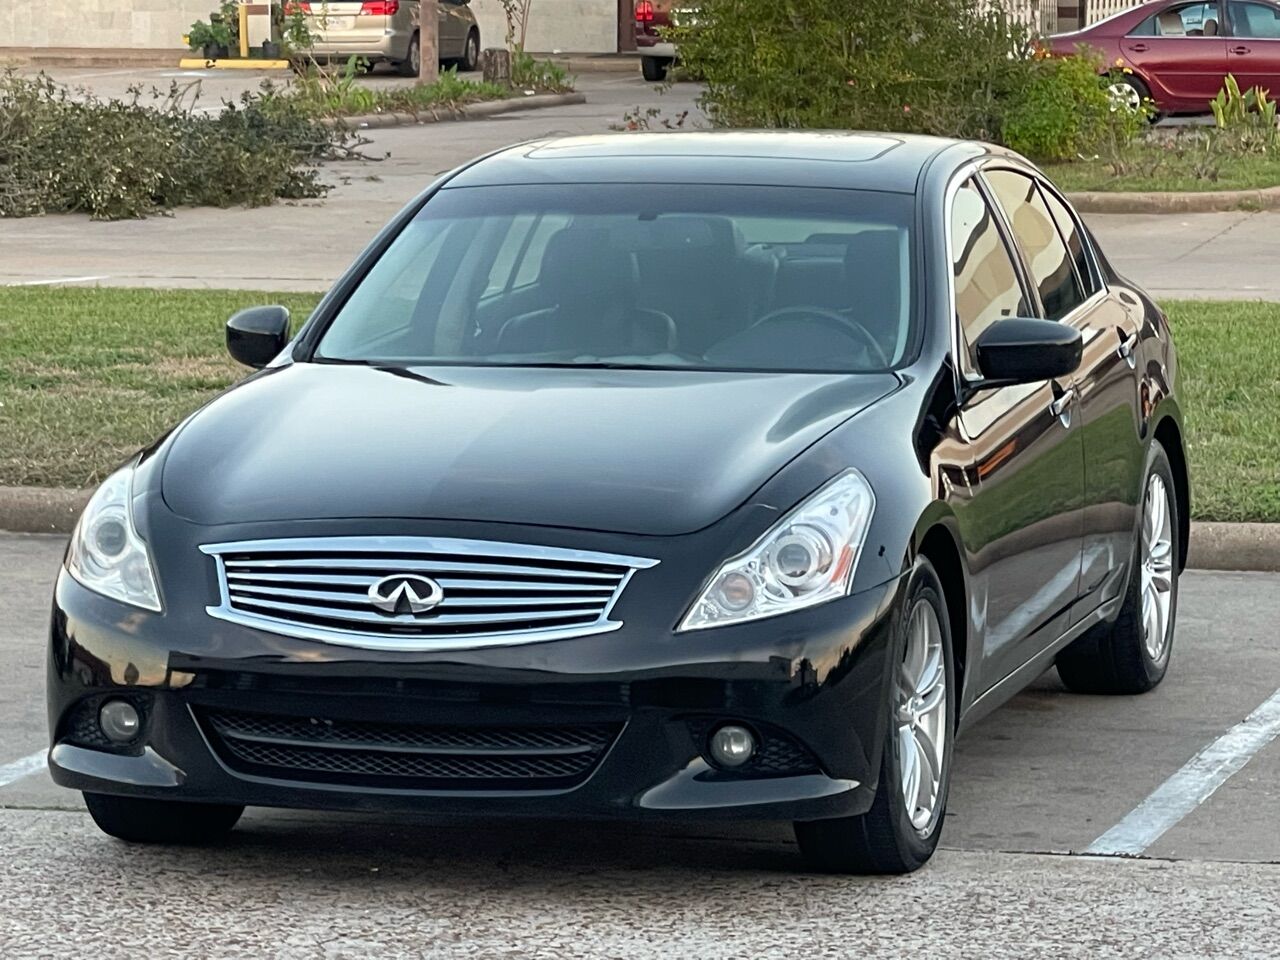 Infiniti G25 For Sale In Cypress, TX - Carsforsale.com®